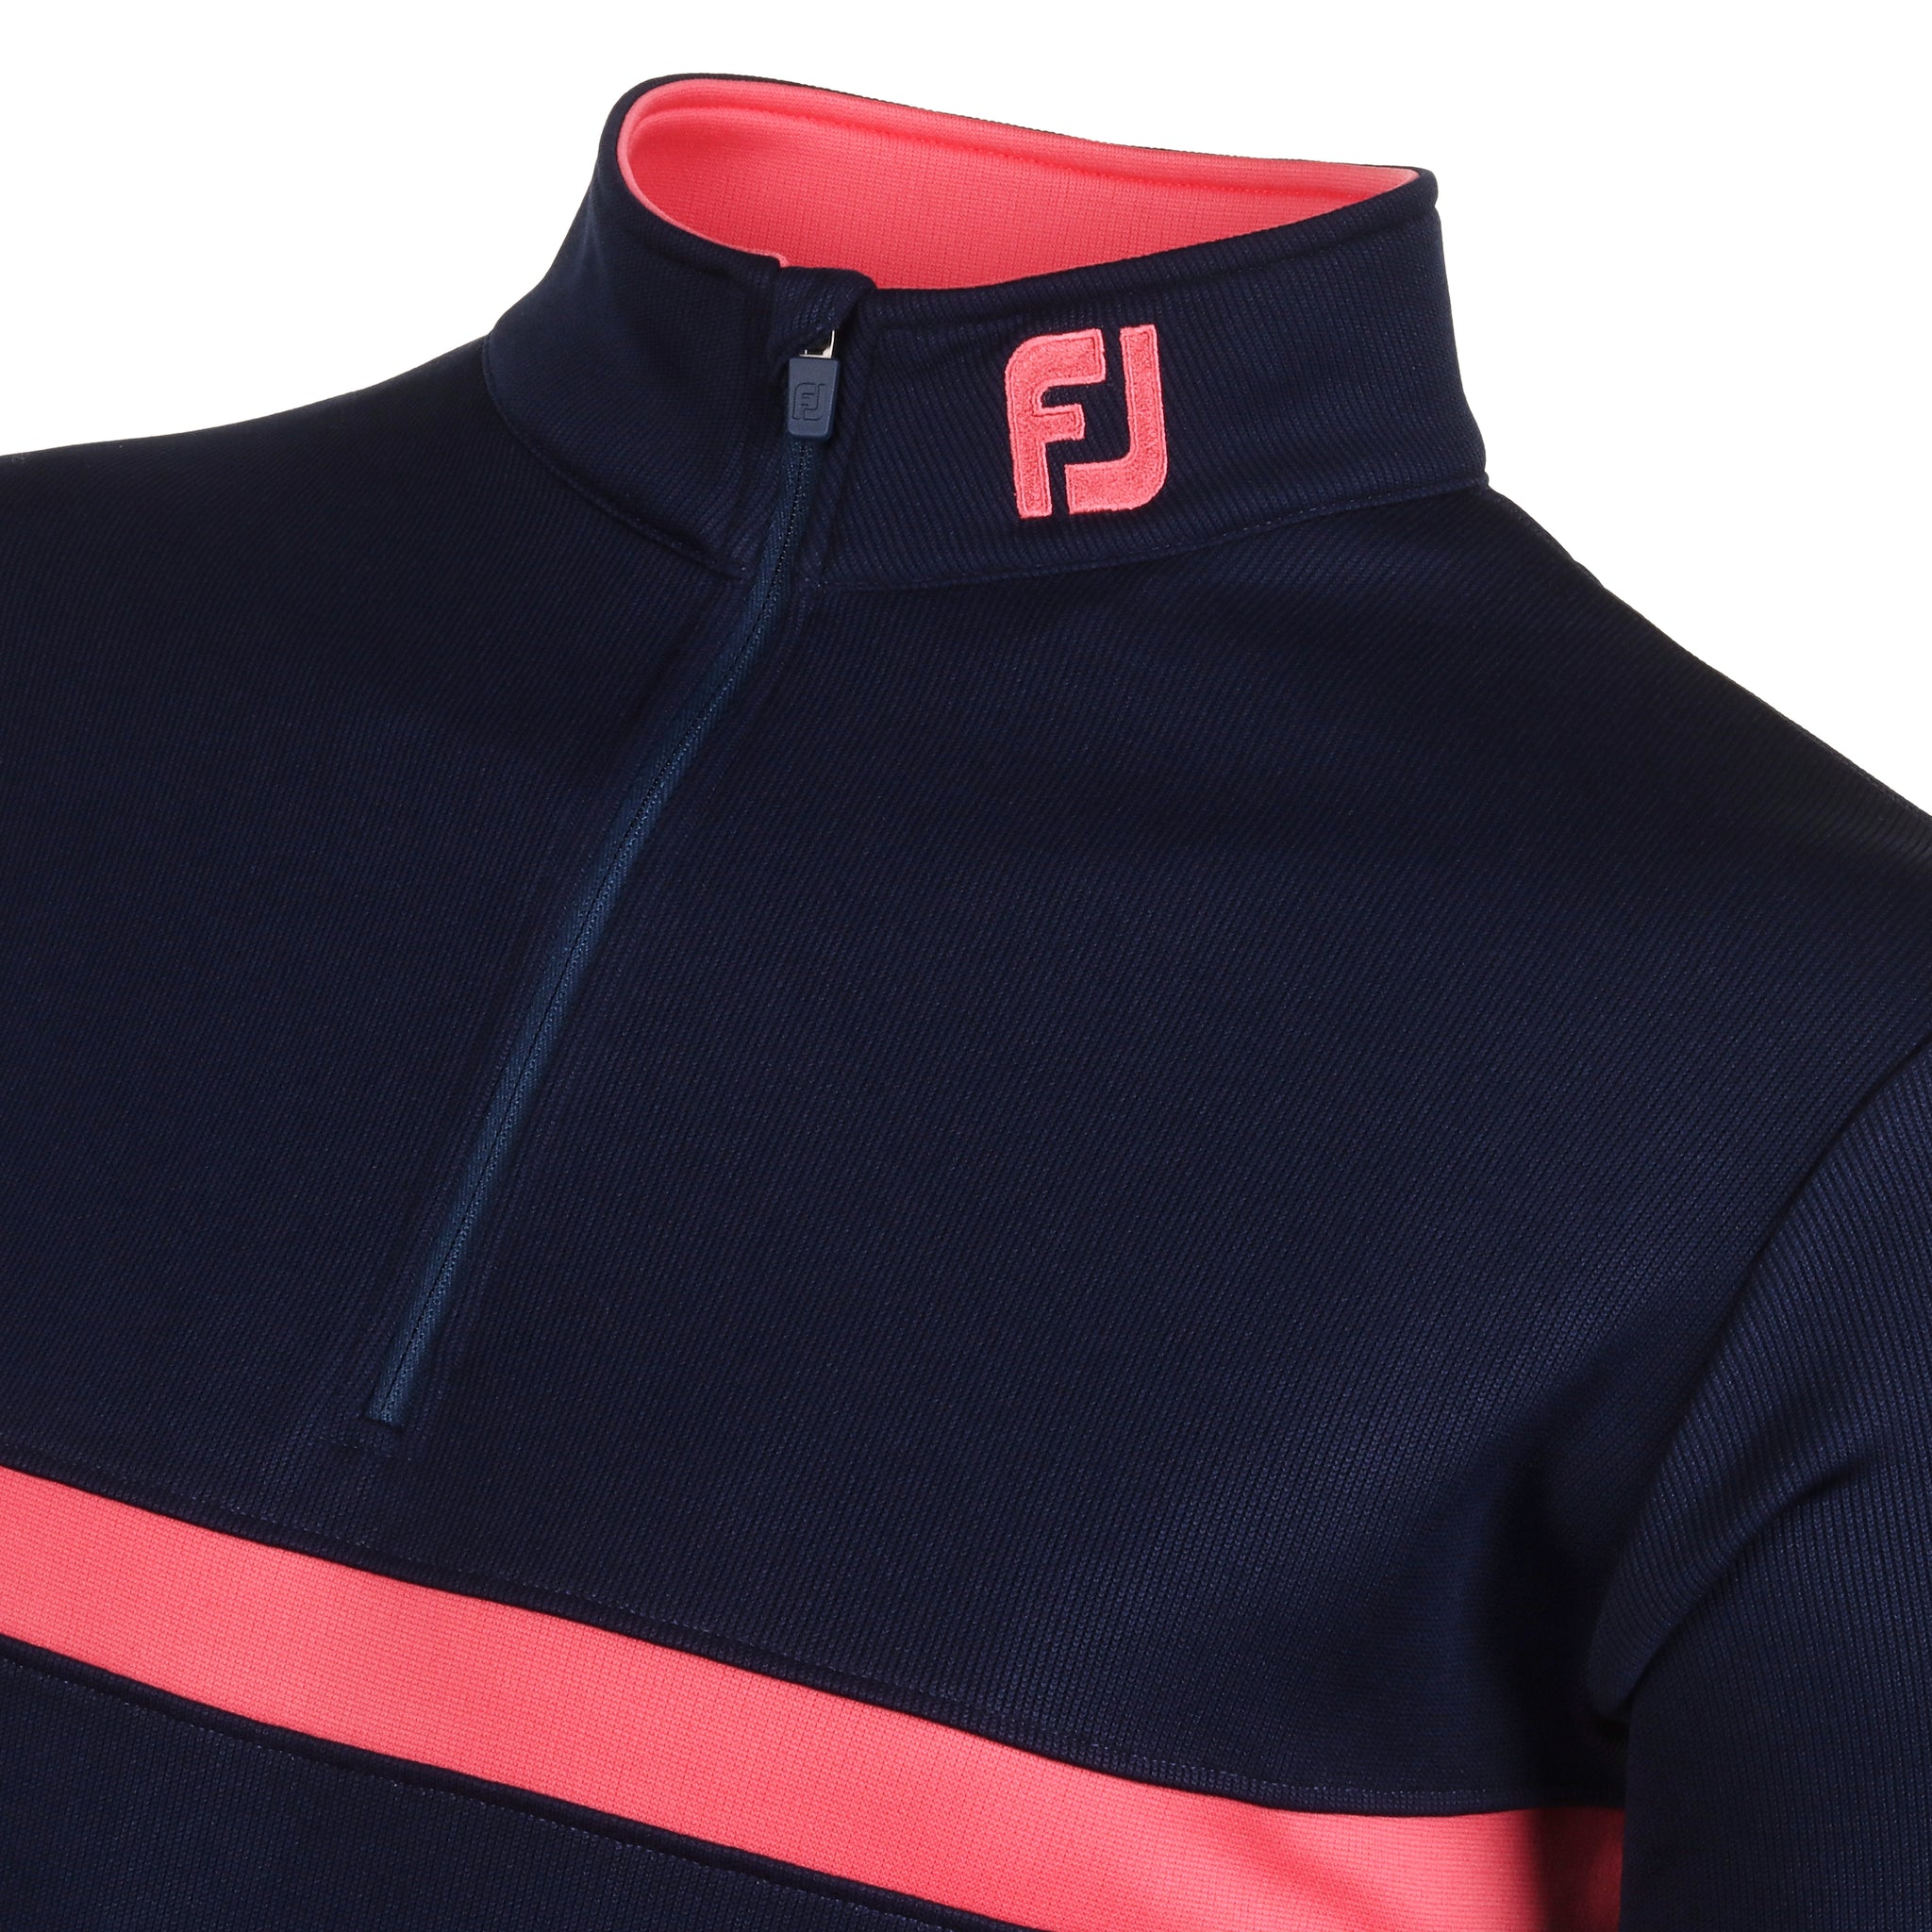 footjoy-inset-stripe-chill-out-pullover-81630-navy-coral-red